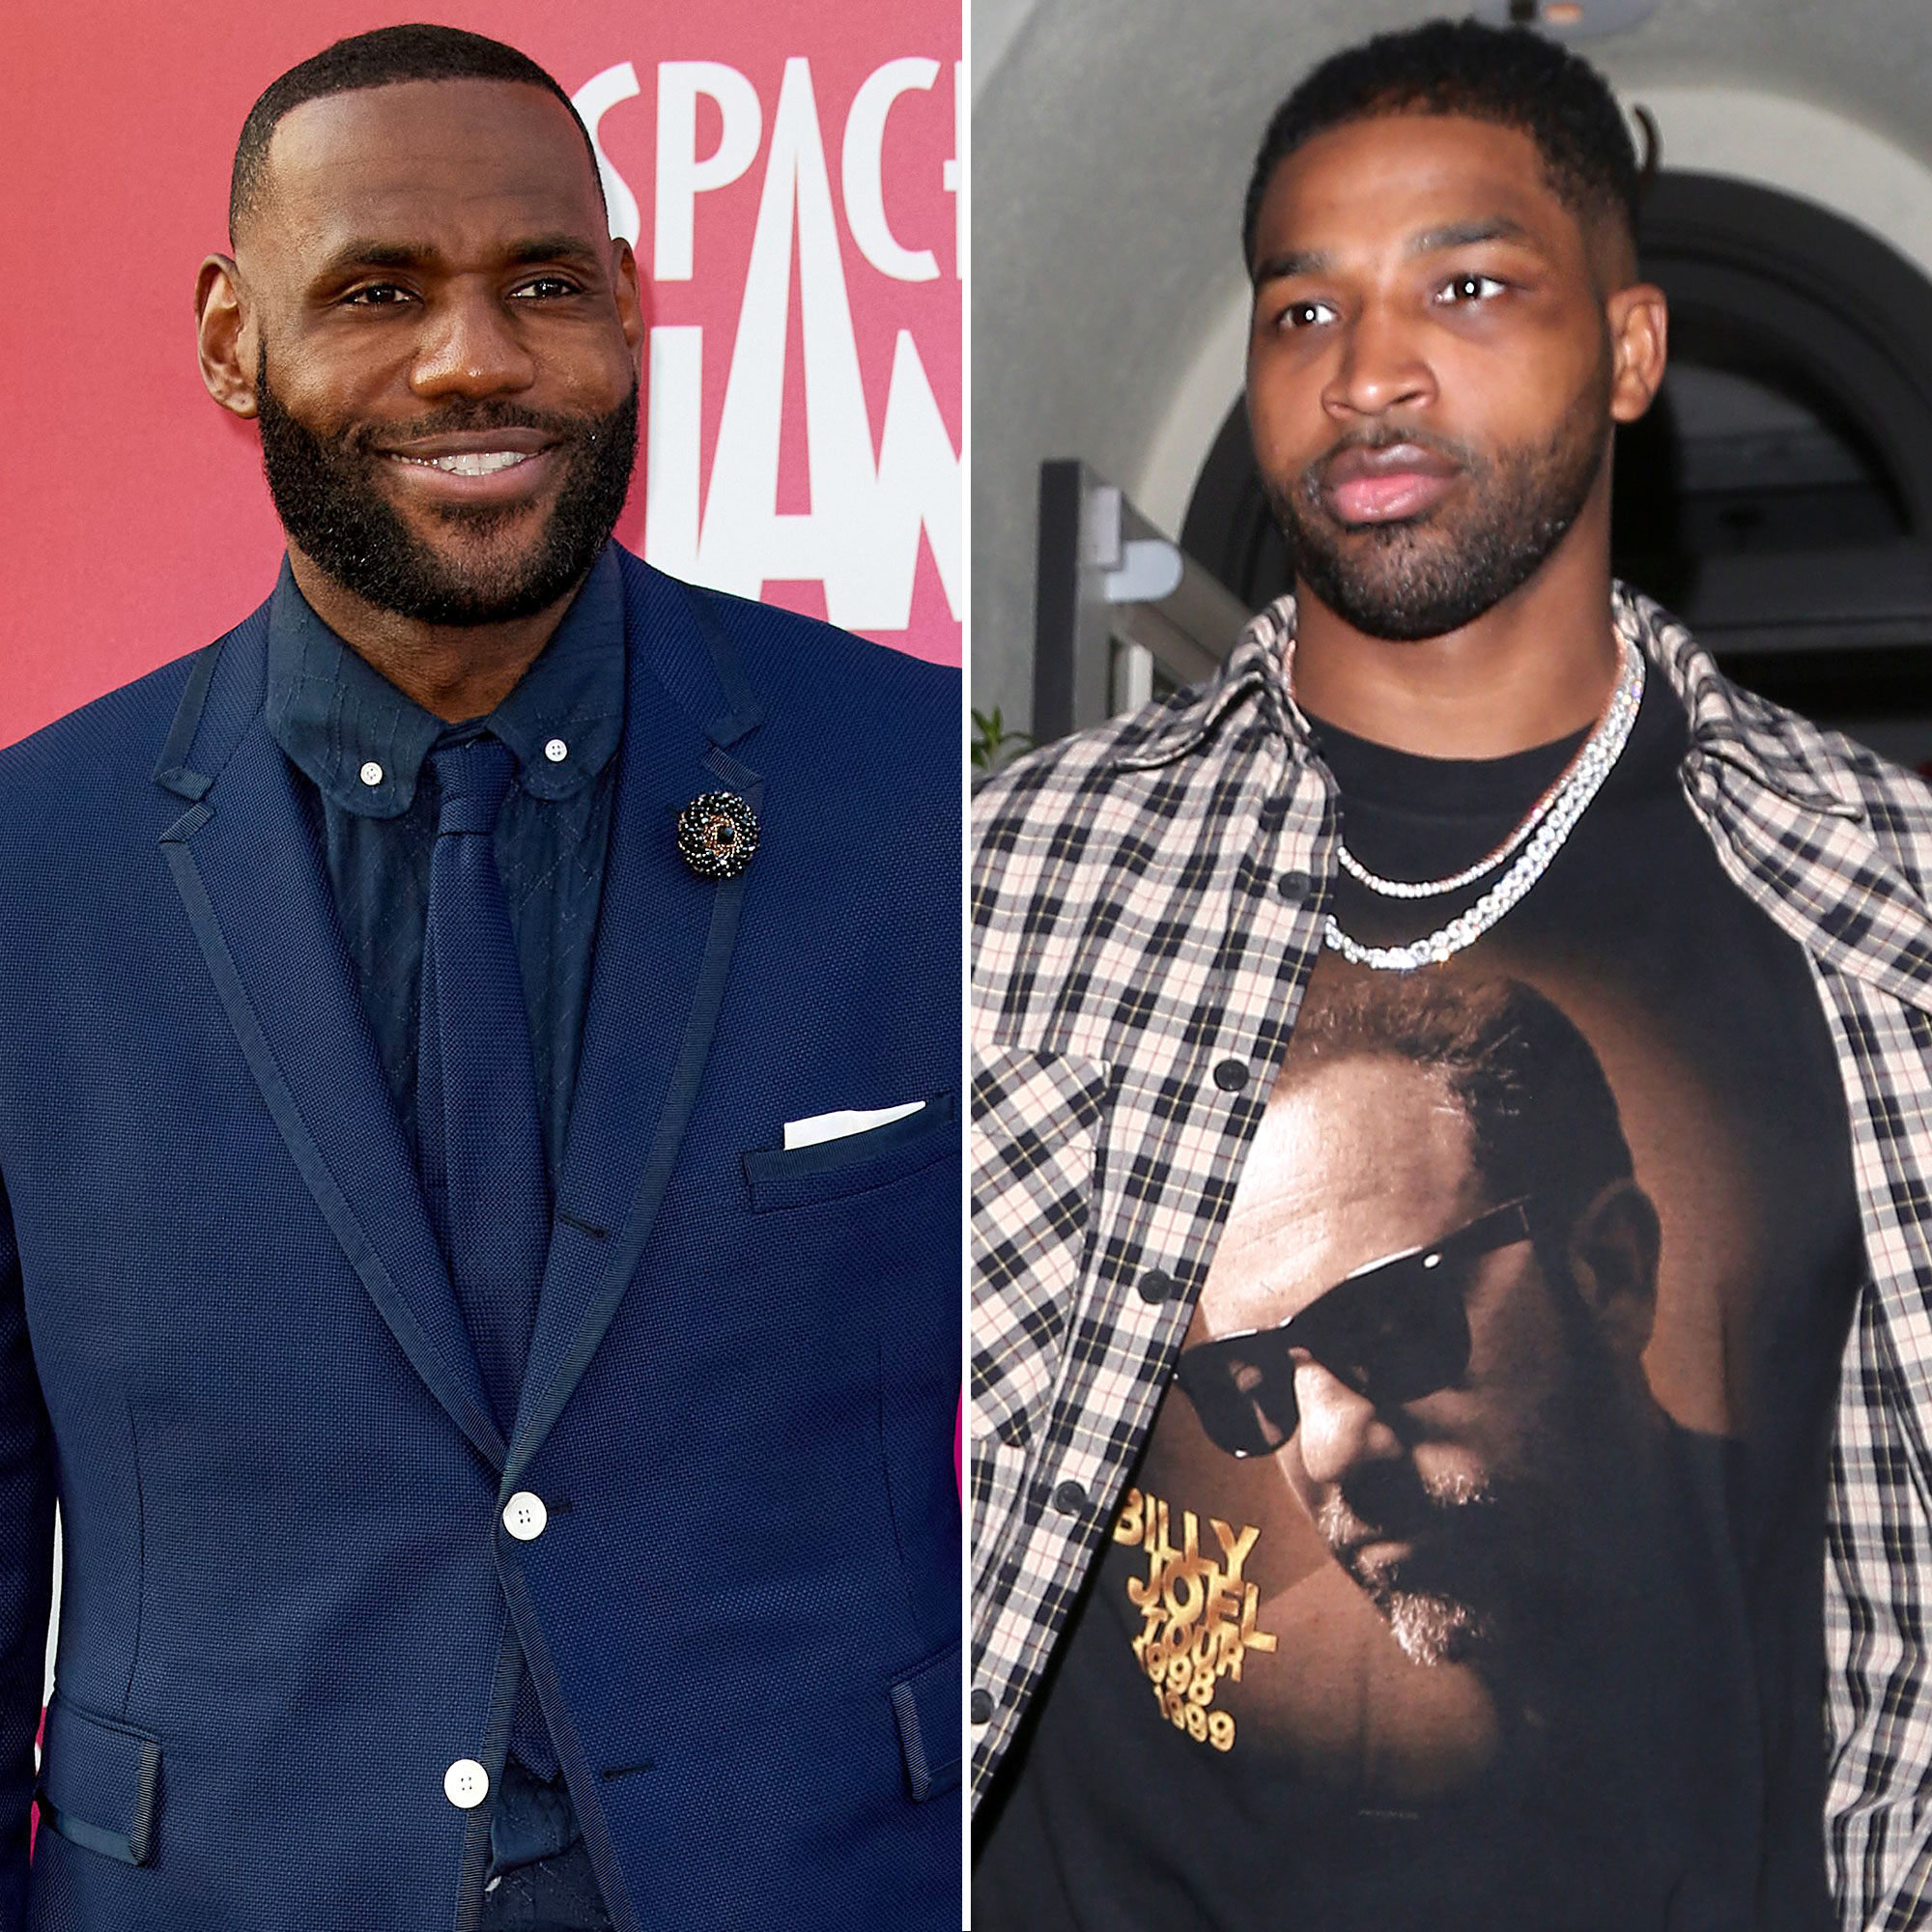 Tristan Thompson to LA Lakers: Wants to reunite with LeBron and